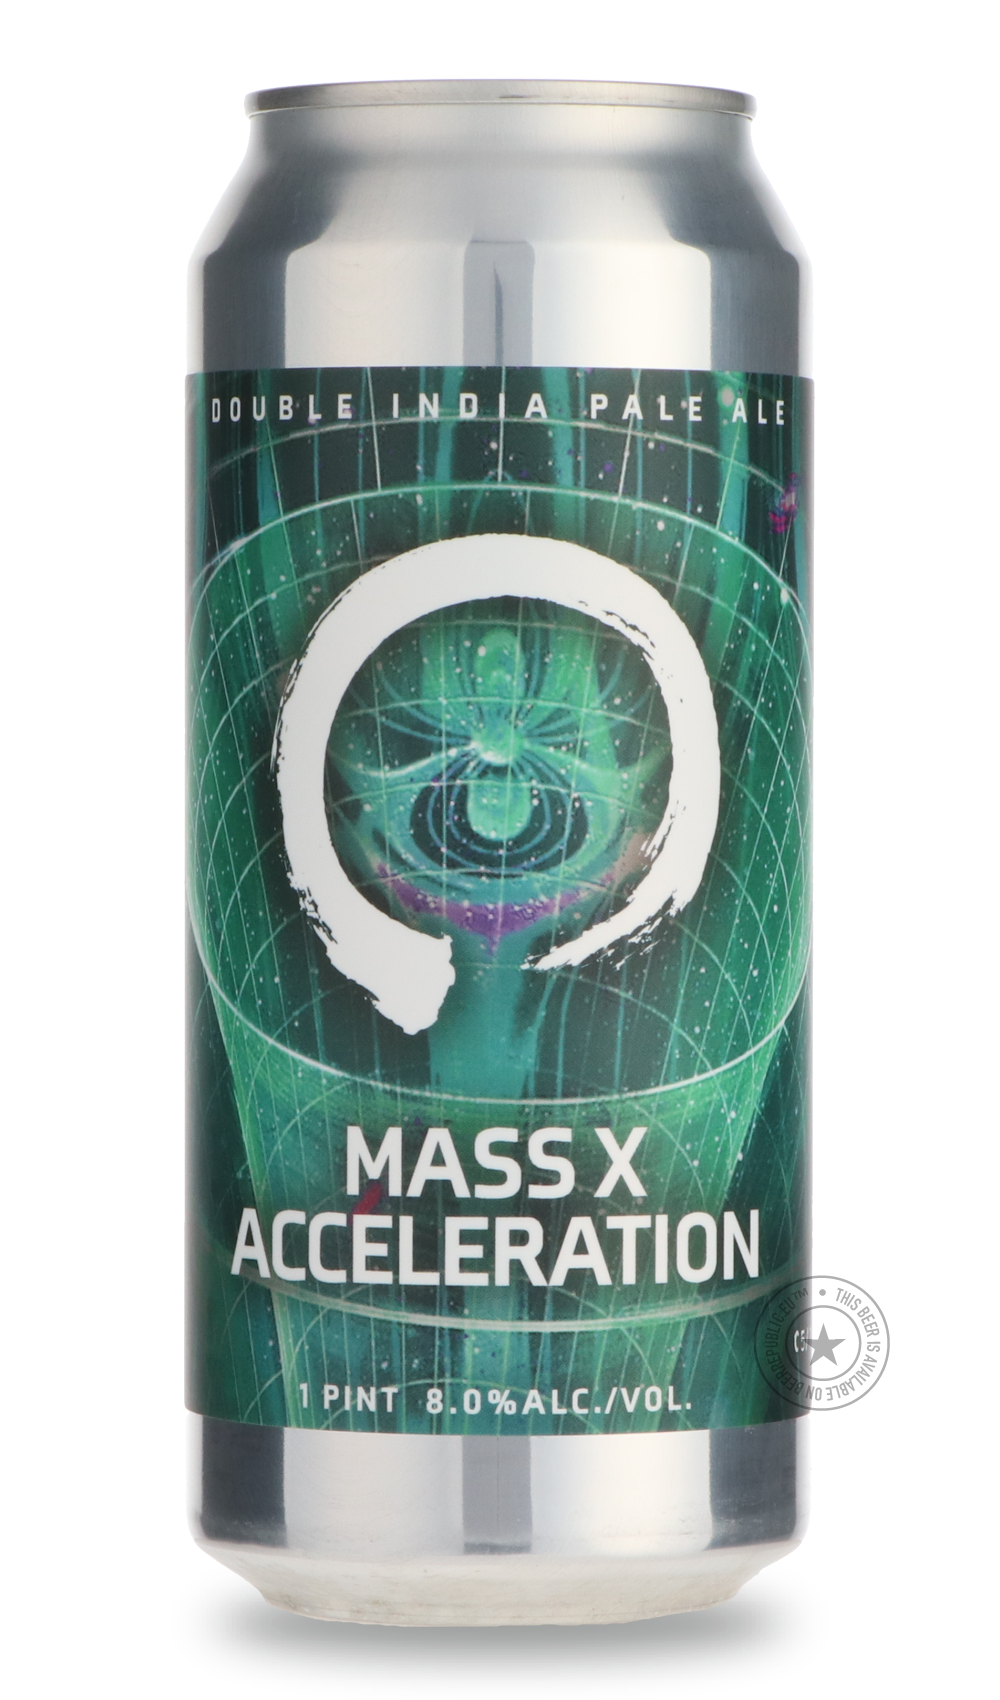 -Equilibrium- Mass x Acceleration-IPA- Only @ Beer Republic - The best online beer store for American & Canadian craft beer - Buy beer online from the USA and Canada - Bier online kopen - Amerikaans bier kopen - Craft beer store - Craft beer kopen - Amerikanisch bier kaufen - Bier online kaufen - Acheter biere online - IPA - Stout - Porter - New England IPA - Hazy IPA - Imperial Stout - Barrel Aged - Barrel Aged Imperial Stout - Brown - Dark beer - Blond - Blonde - Pilsner - Lager - Wheat - Weizen - Amber -